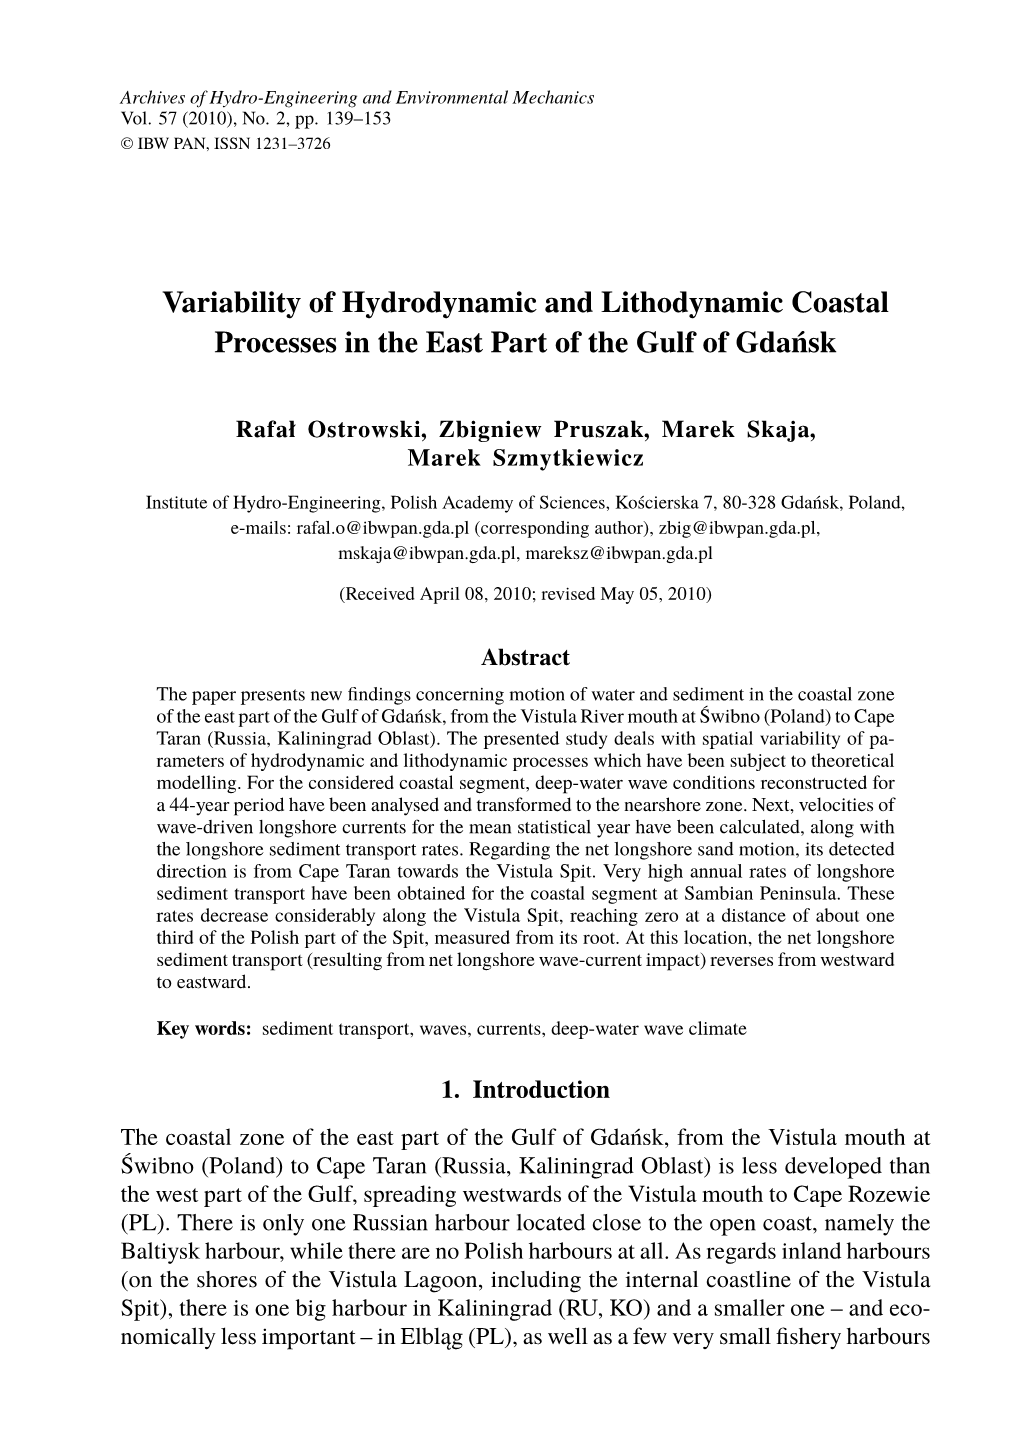 Variability of Hydrodynamic and Lithodynamic Coastal Processes in the East Part of the Gulf of Gdańsk